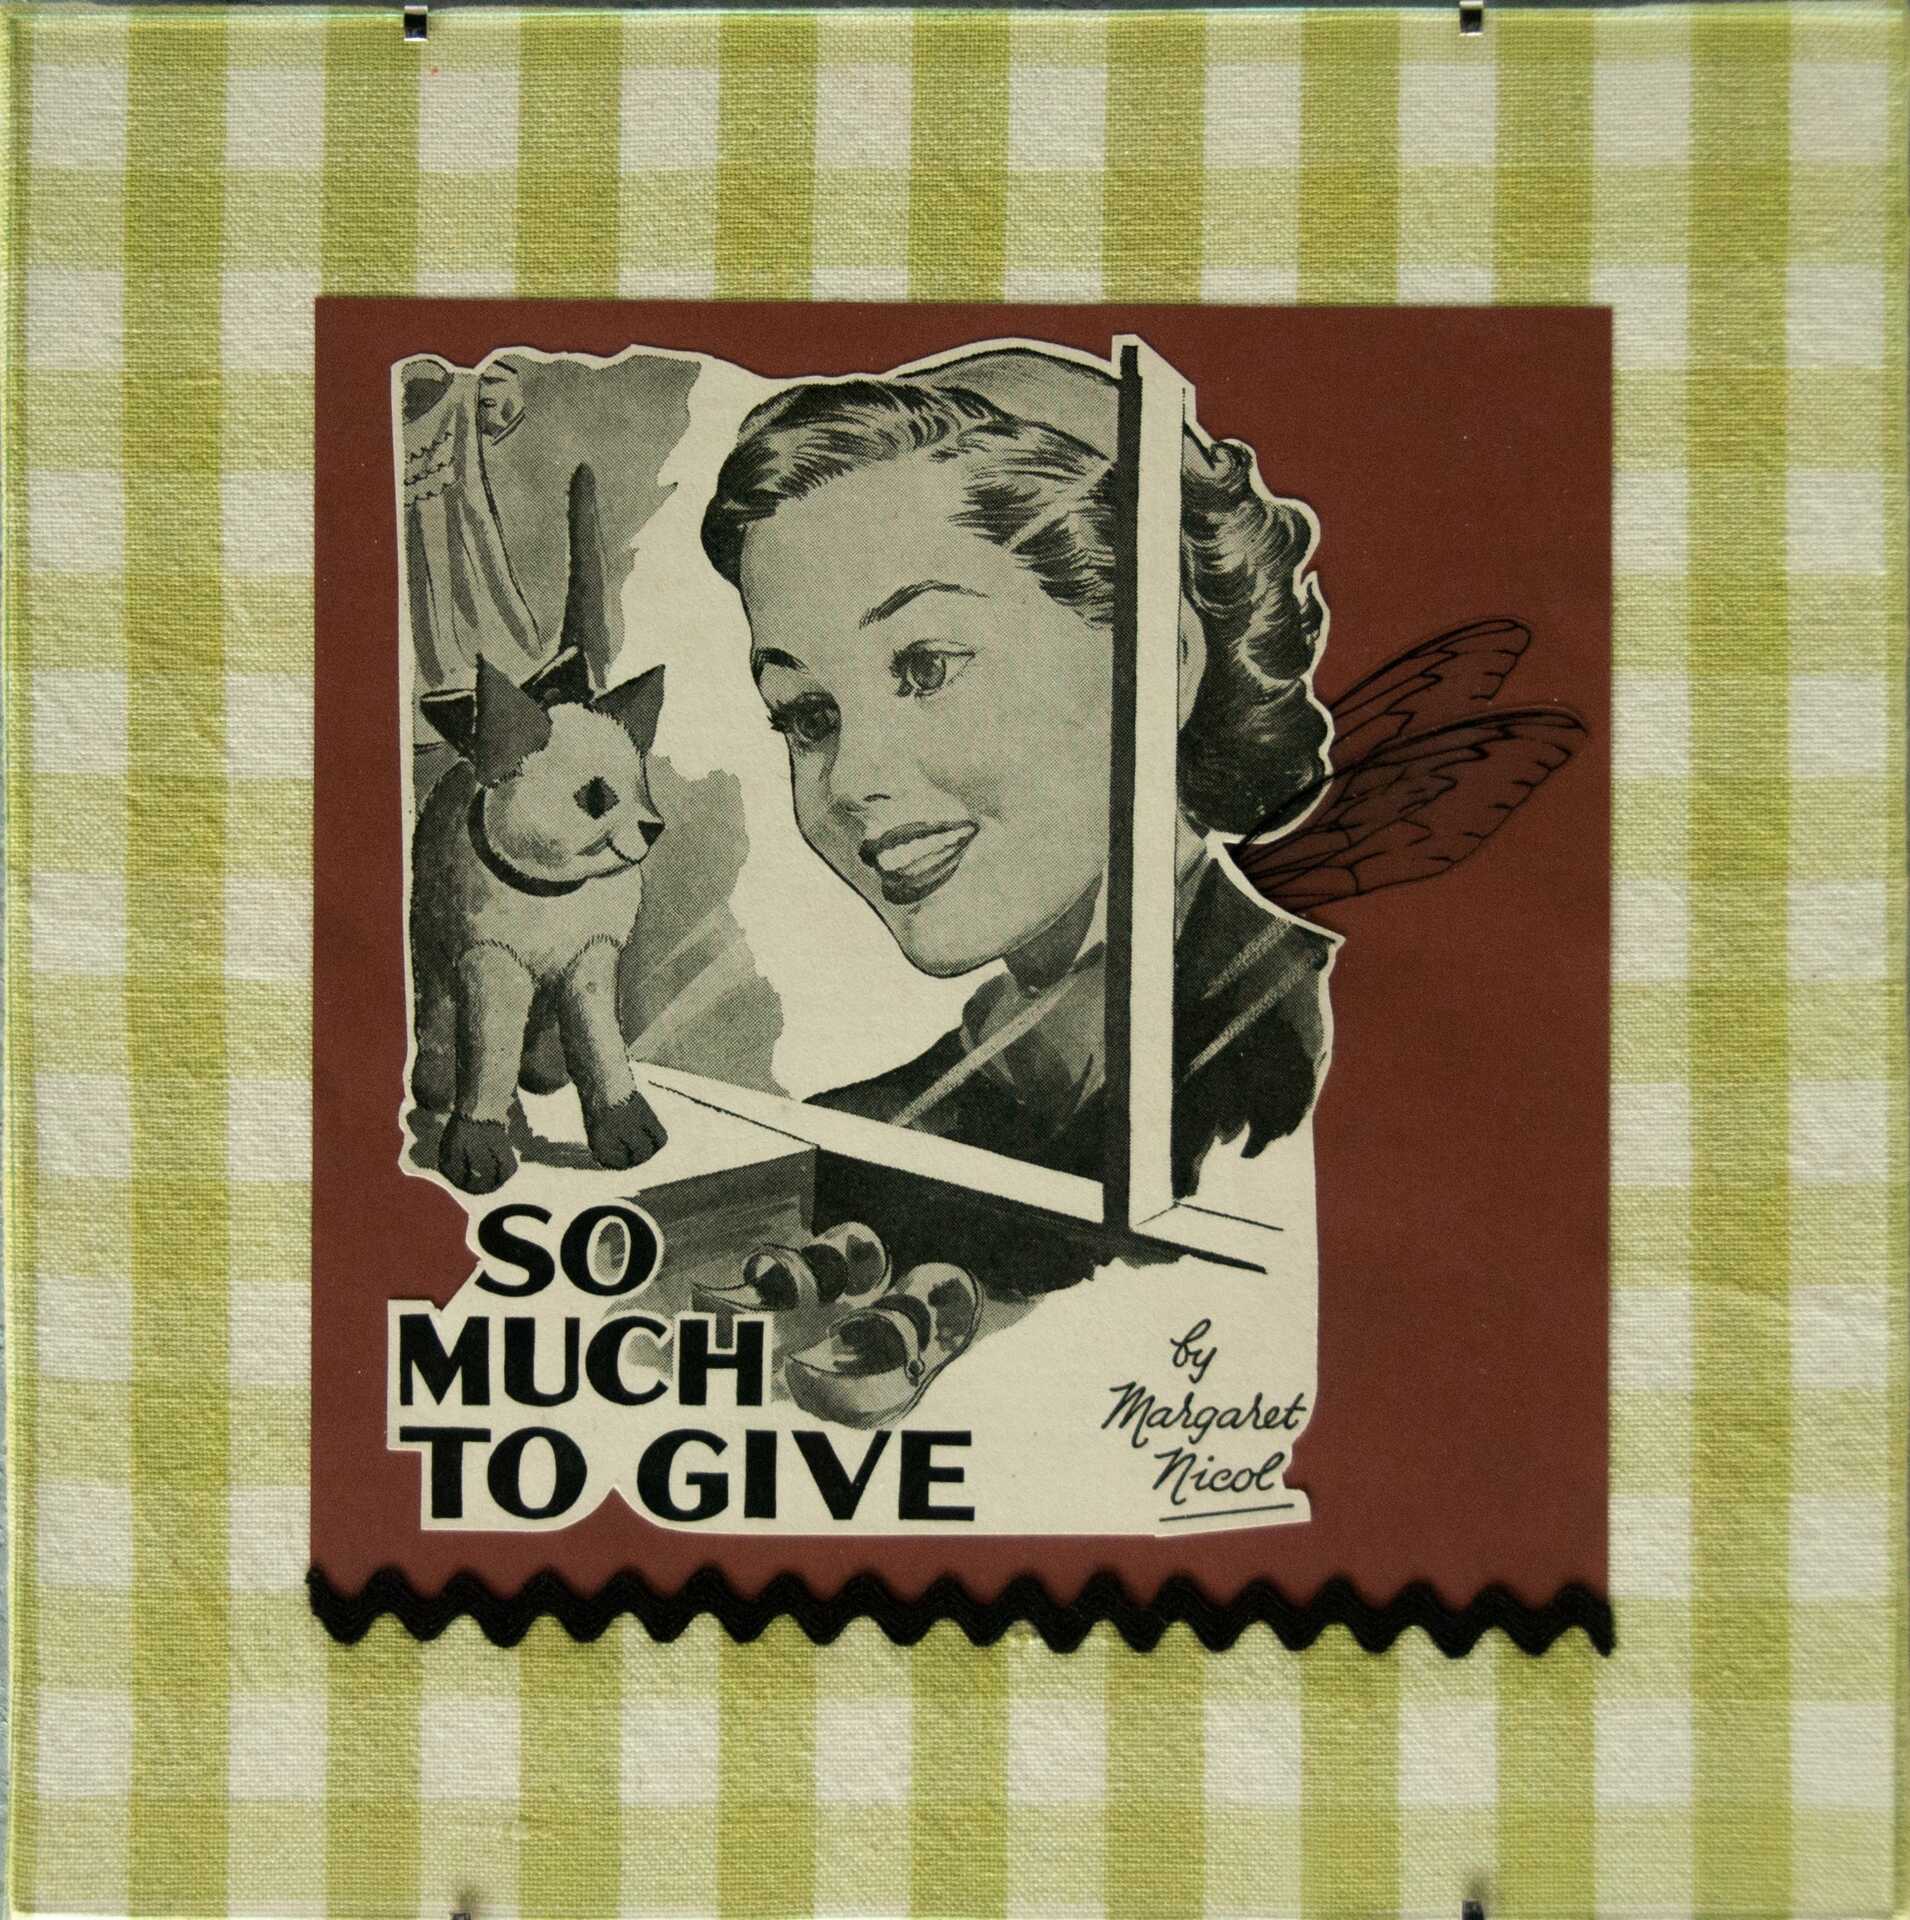 "So Much to Give" by Libby Bloxham. A vintage book illustration is layered over terracotta card and vintage green and white gingham fabric, to create a square collage. The illustration depicts a girl looking though a window at a toy kitten with delight, and the title 'So Much to Give by Margaret Nicol'. Acetate insect wings have been added to the girl.